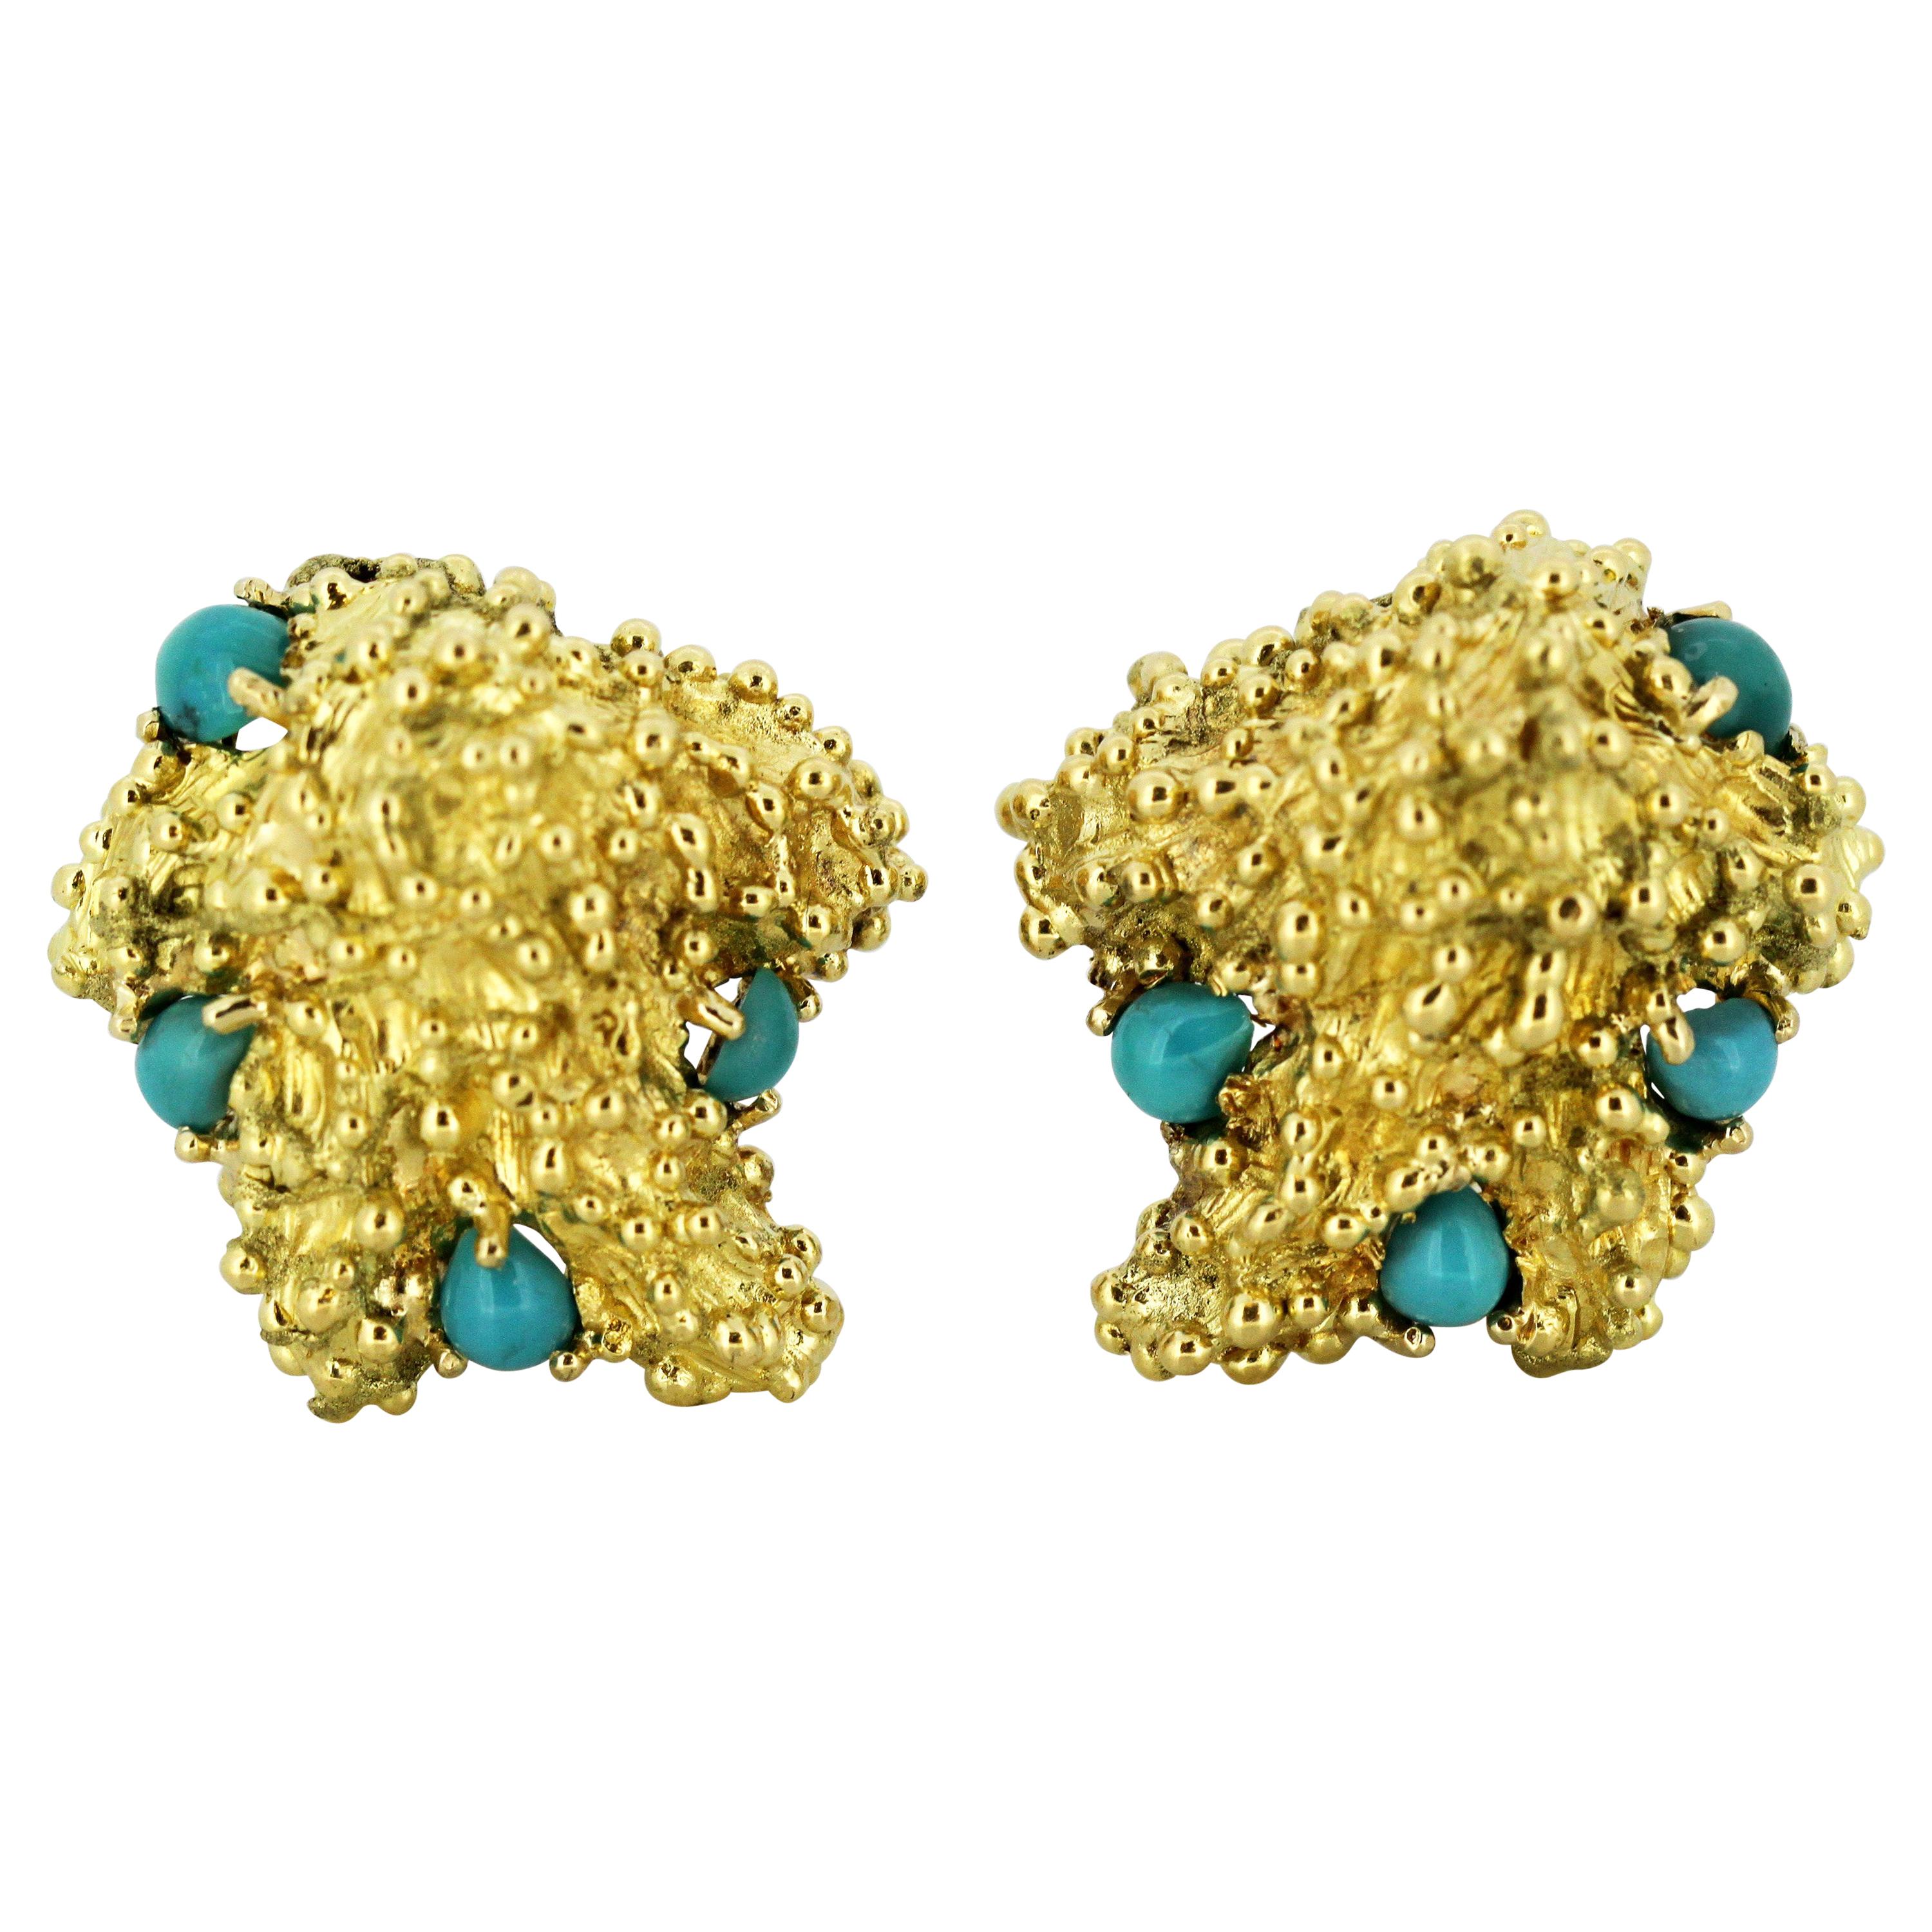 Tiffany & Co., 18 Karat Gold Ladies Clip-On Earrings with Turquoise, Italy 1990s